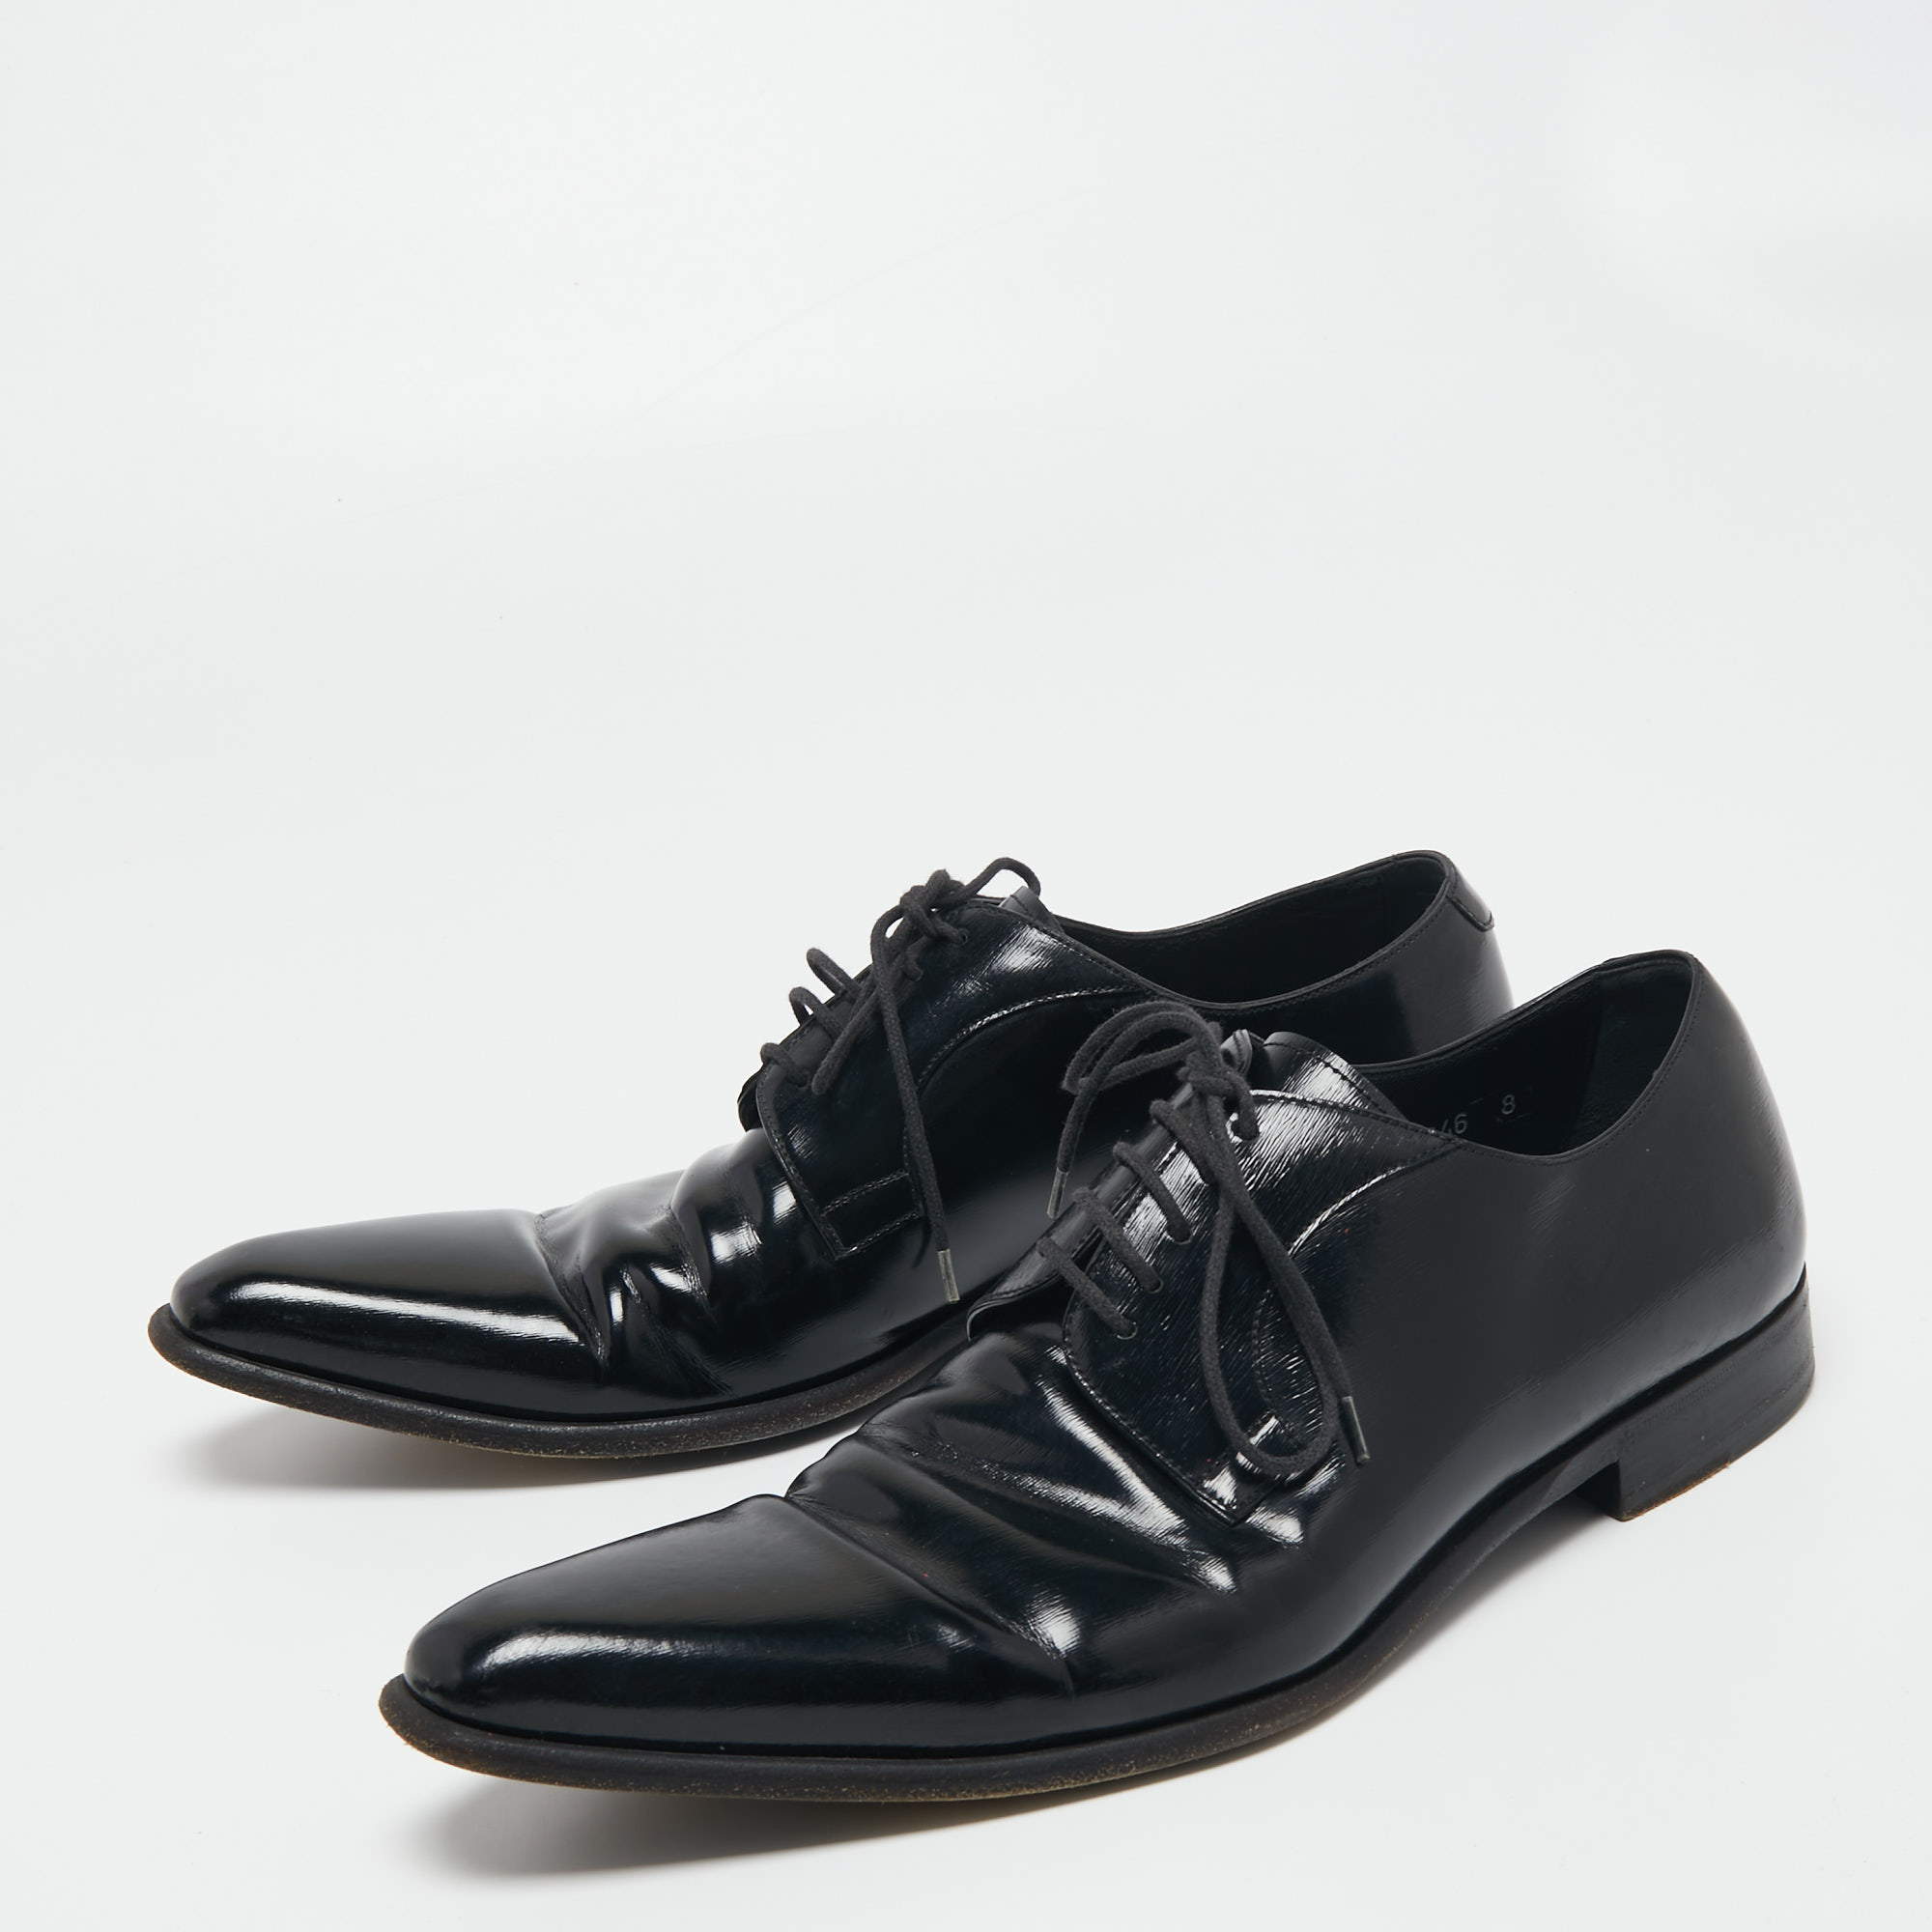 

Dolce & Gabbana Black Patent Leather Pointed Toe Derby Size